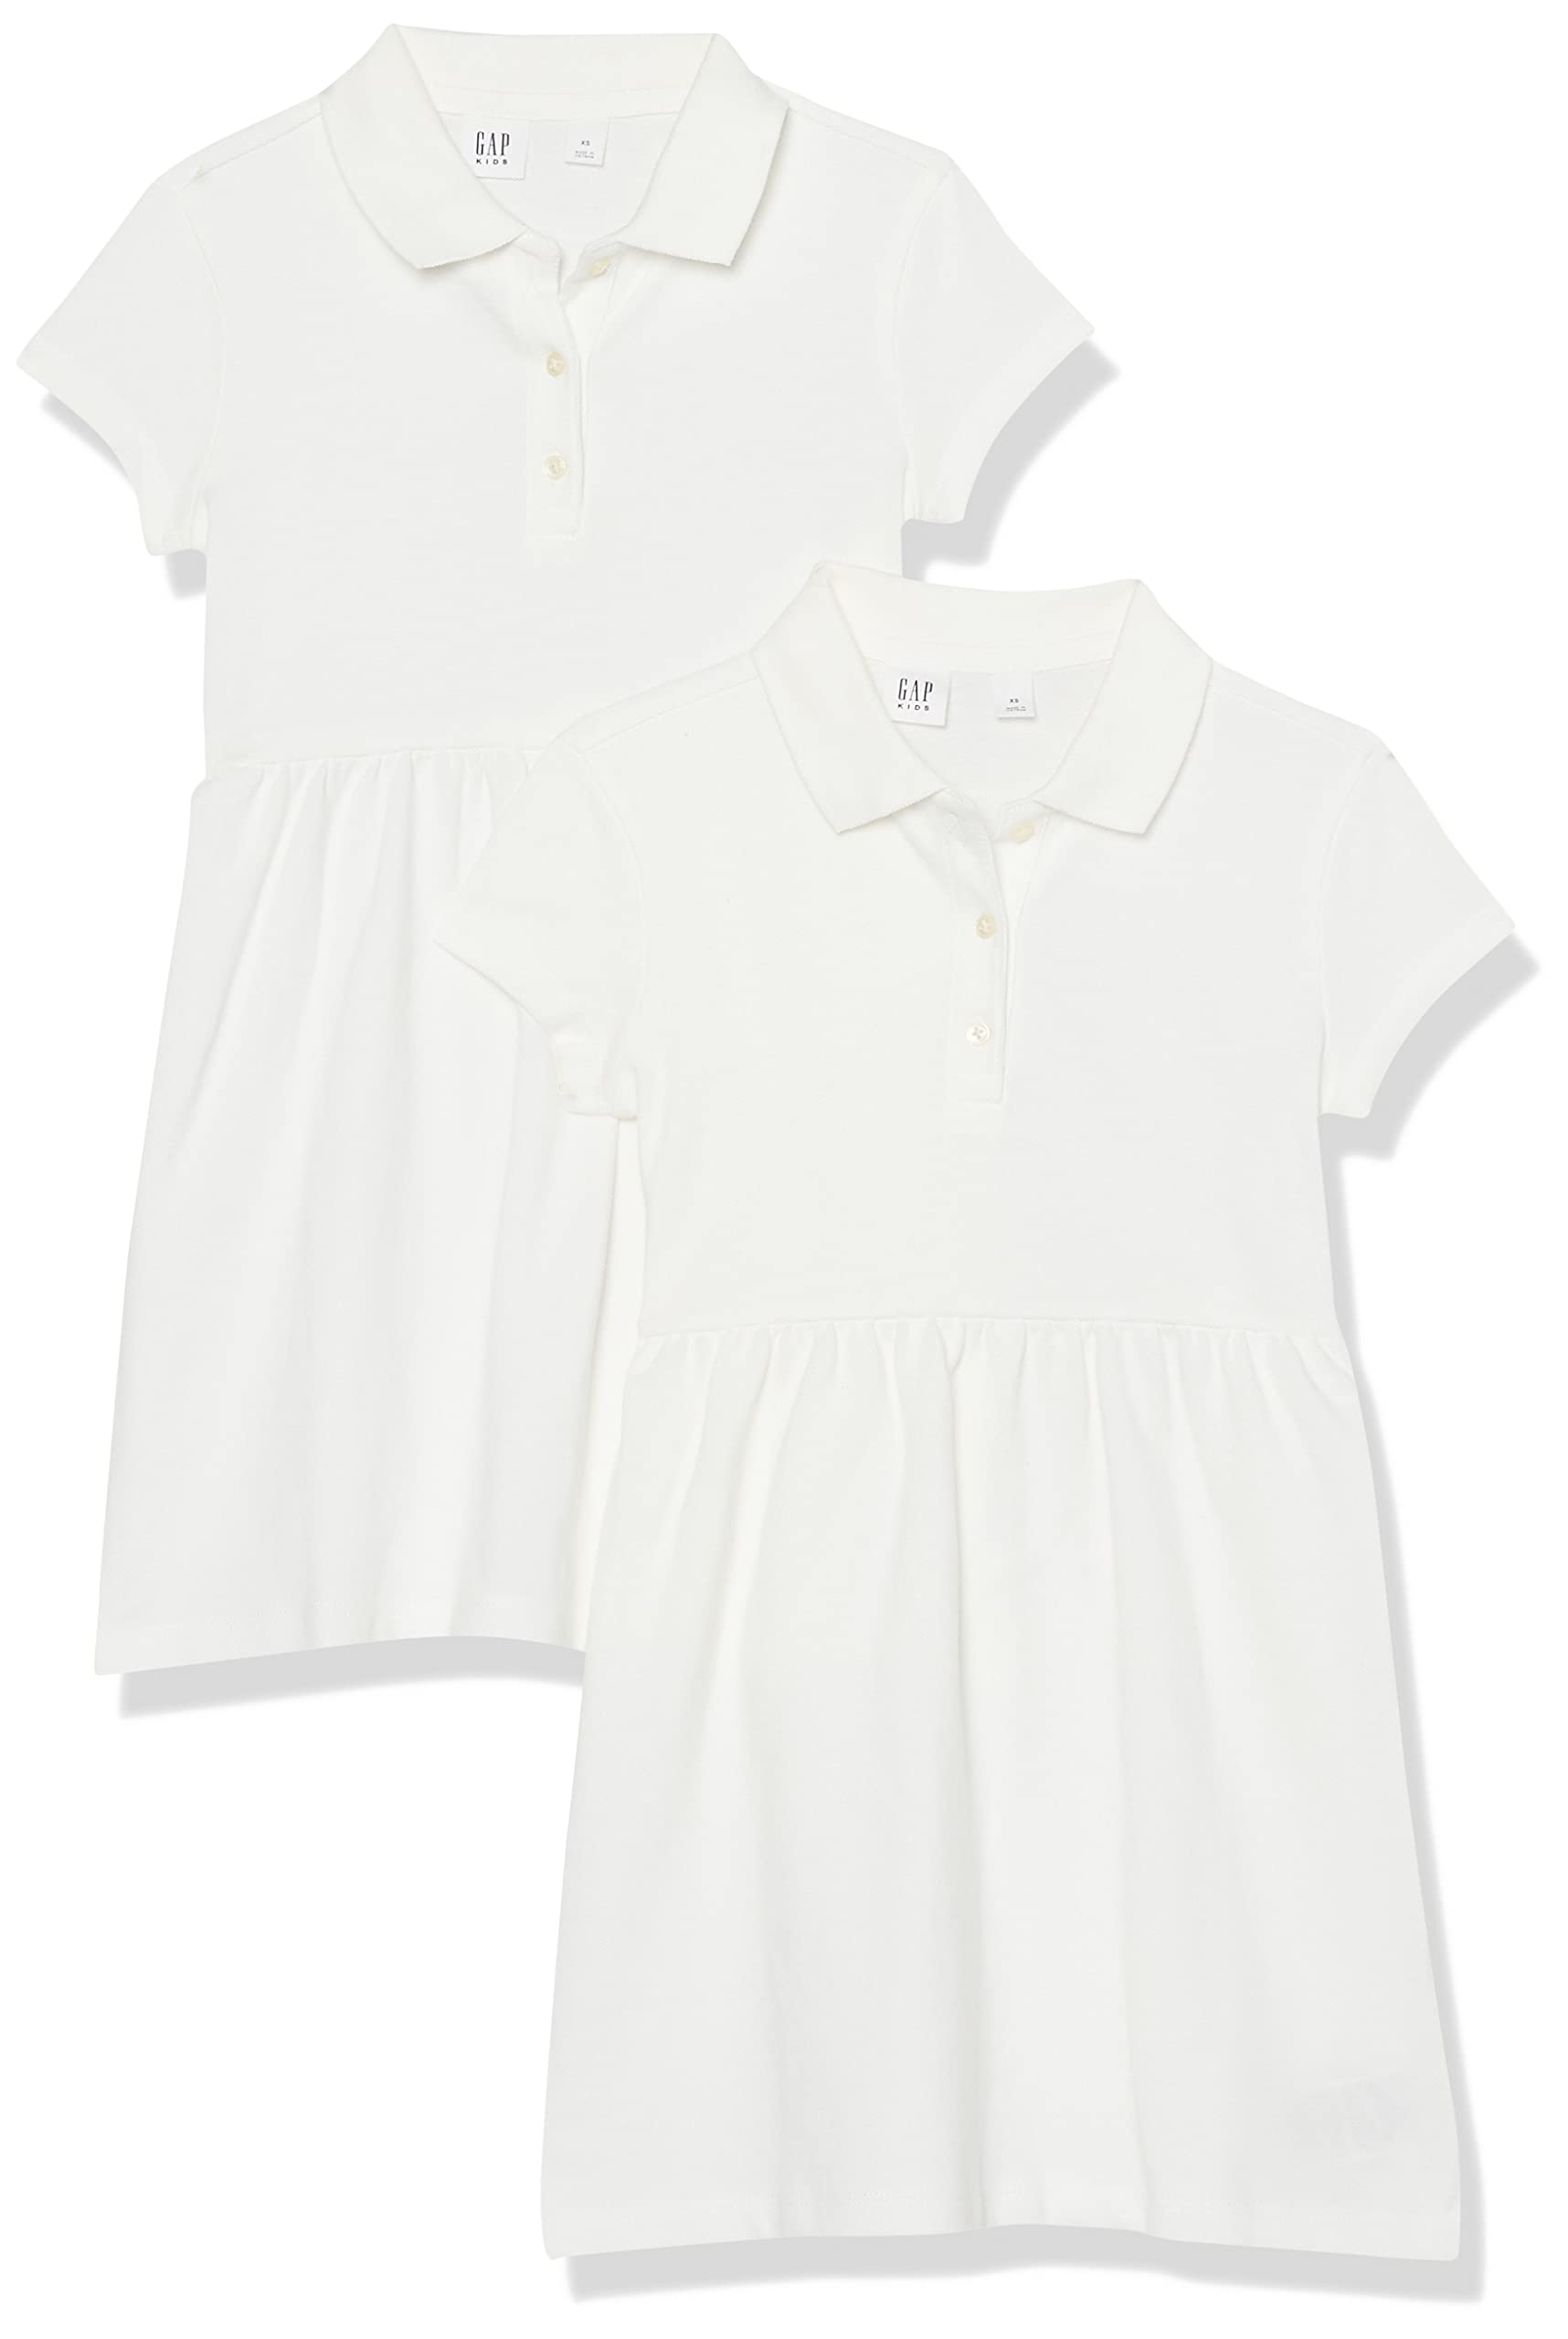 GAP Girls' One Size 2-Pack Polo Dress